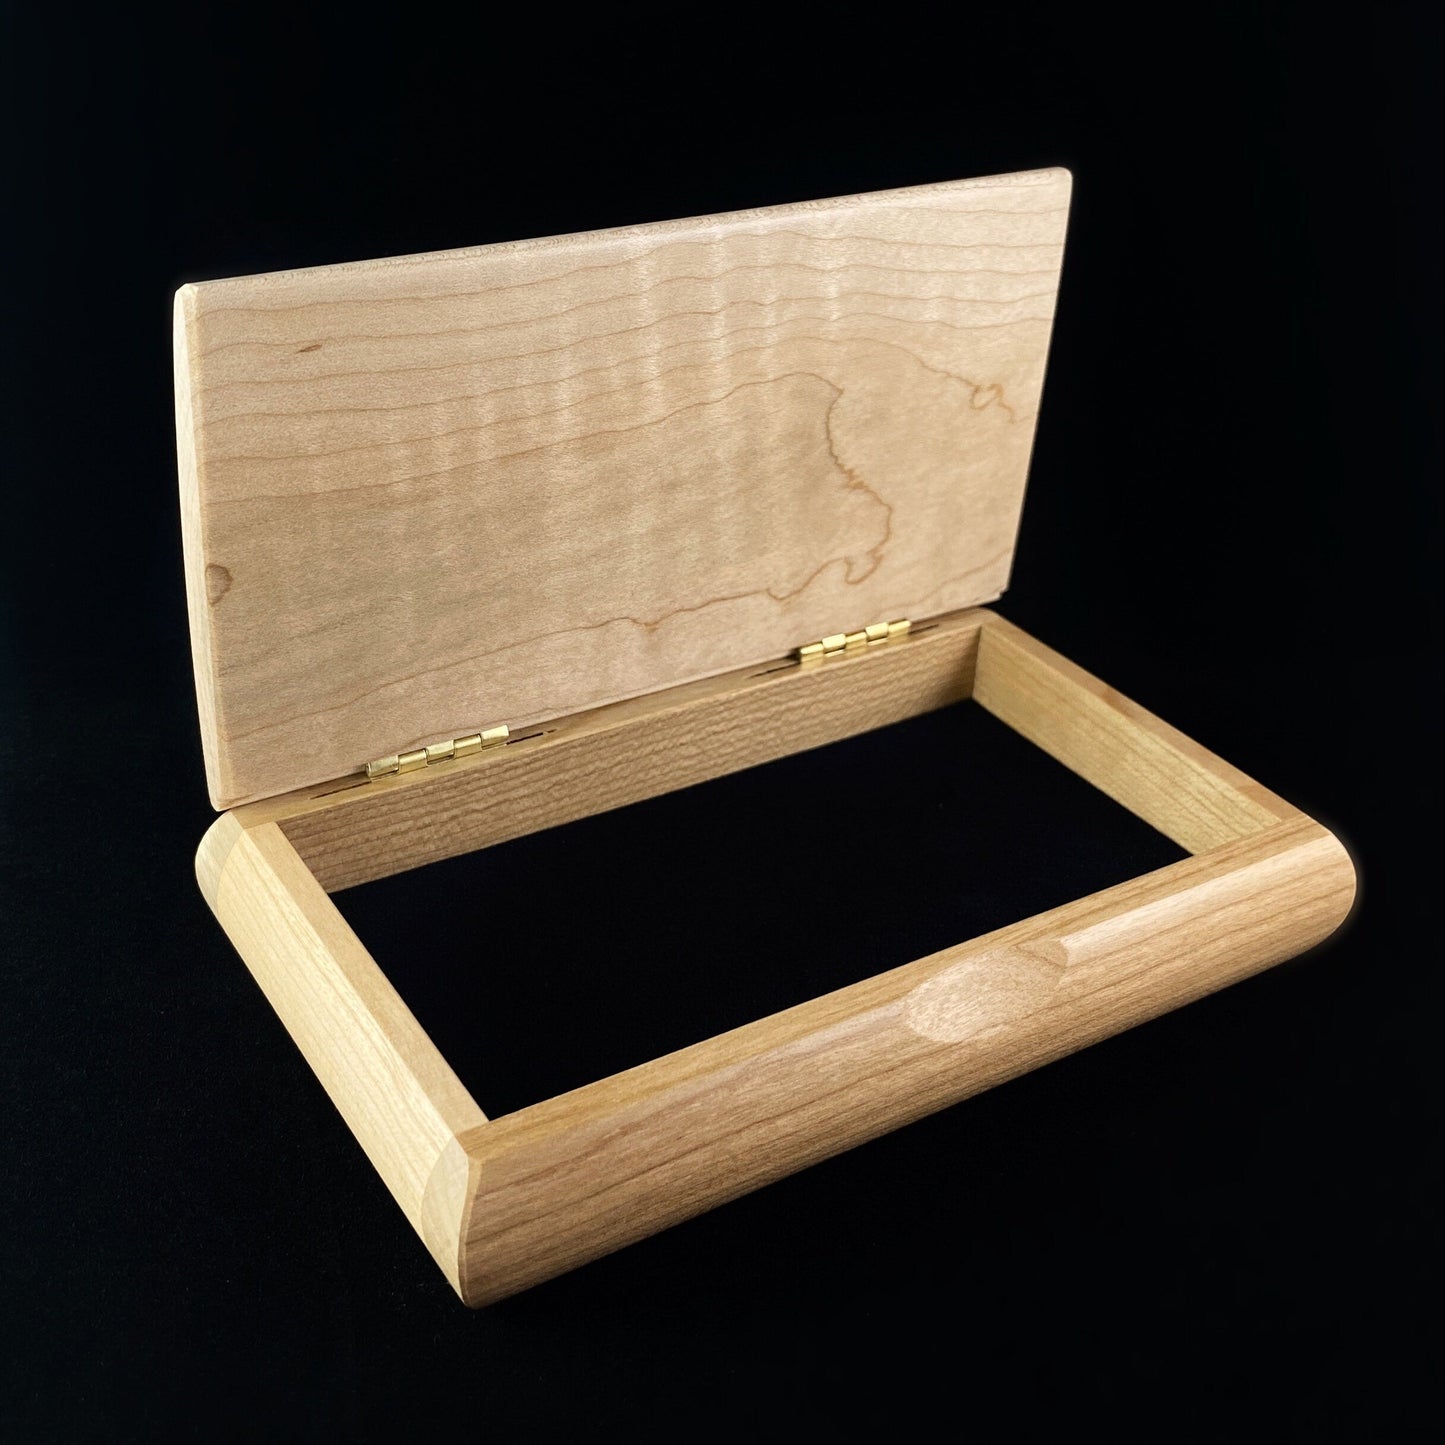 Always Remember You Are Braver Quote Box, Handmade Wooden Box with Cherry and Curly Maple, Made in USA